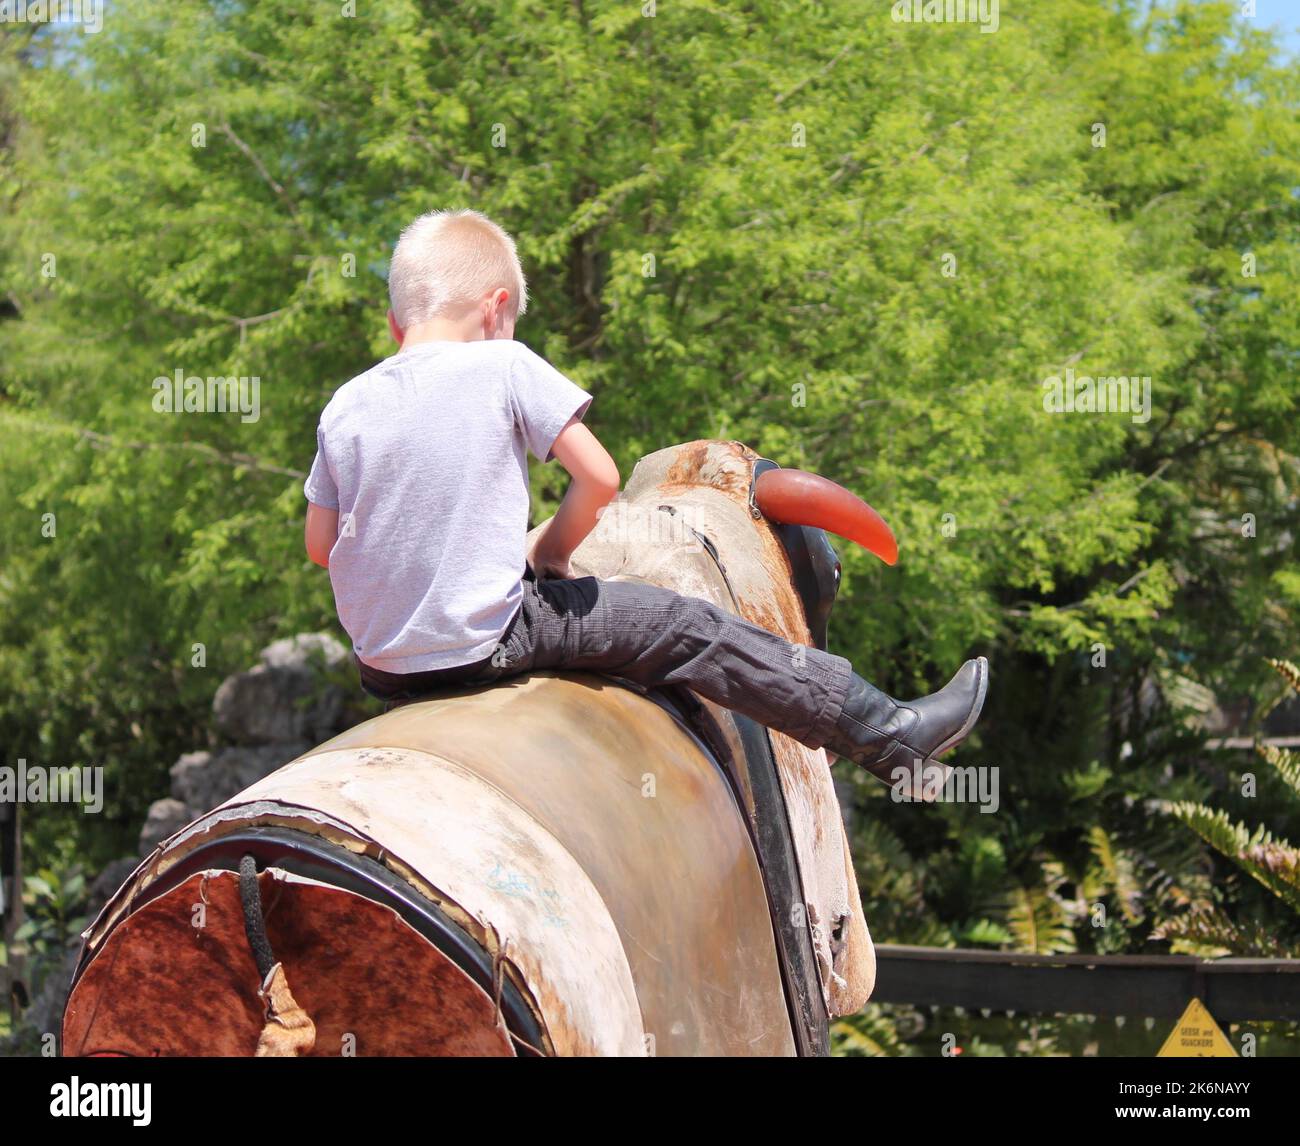 A young boy, wearing cowboy boots, riding on the back of a mechanical bull. Stock Photo